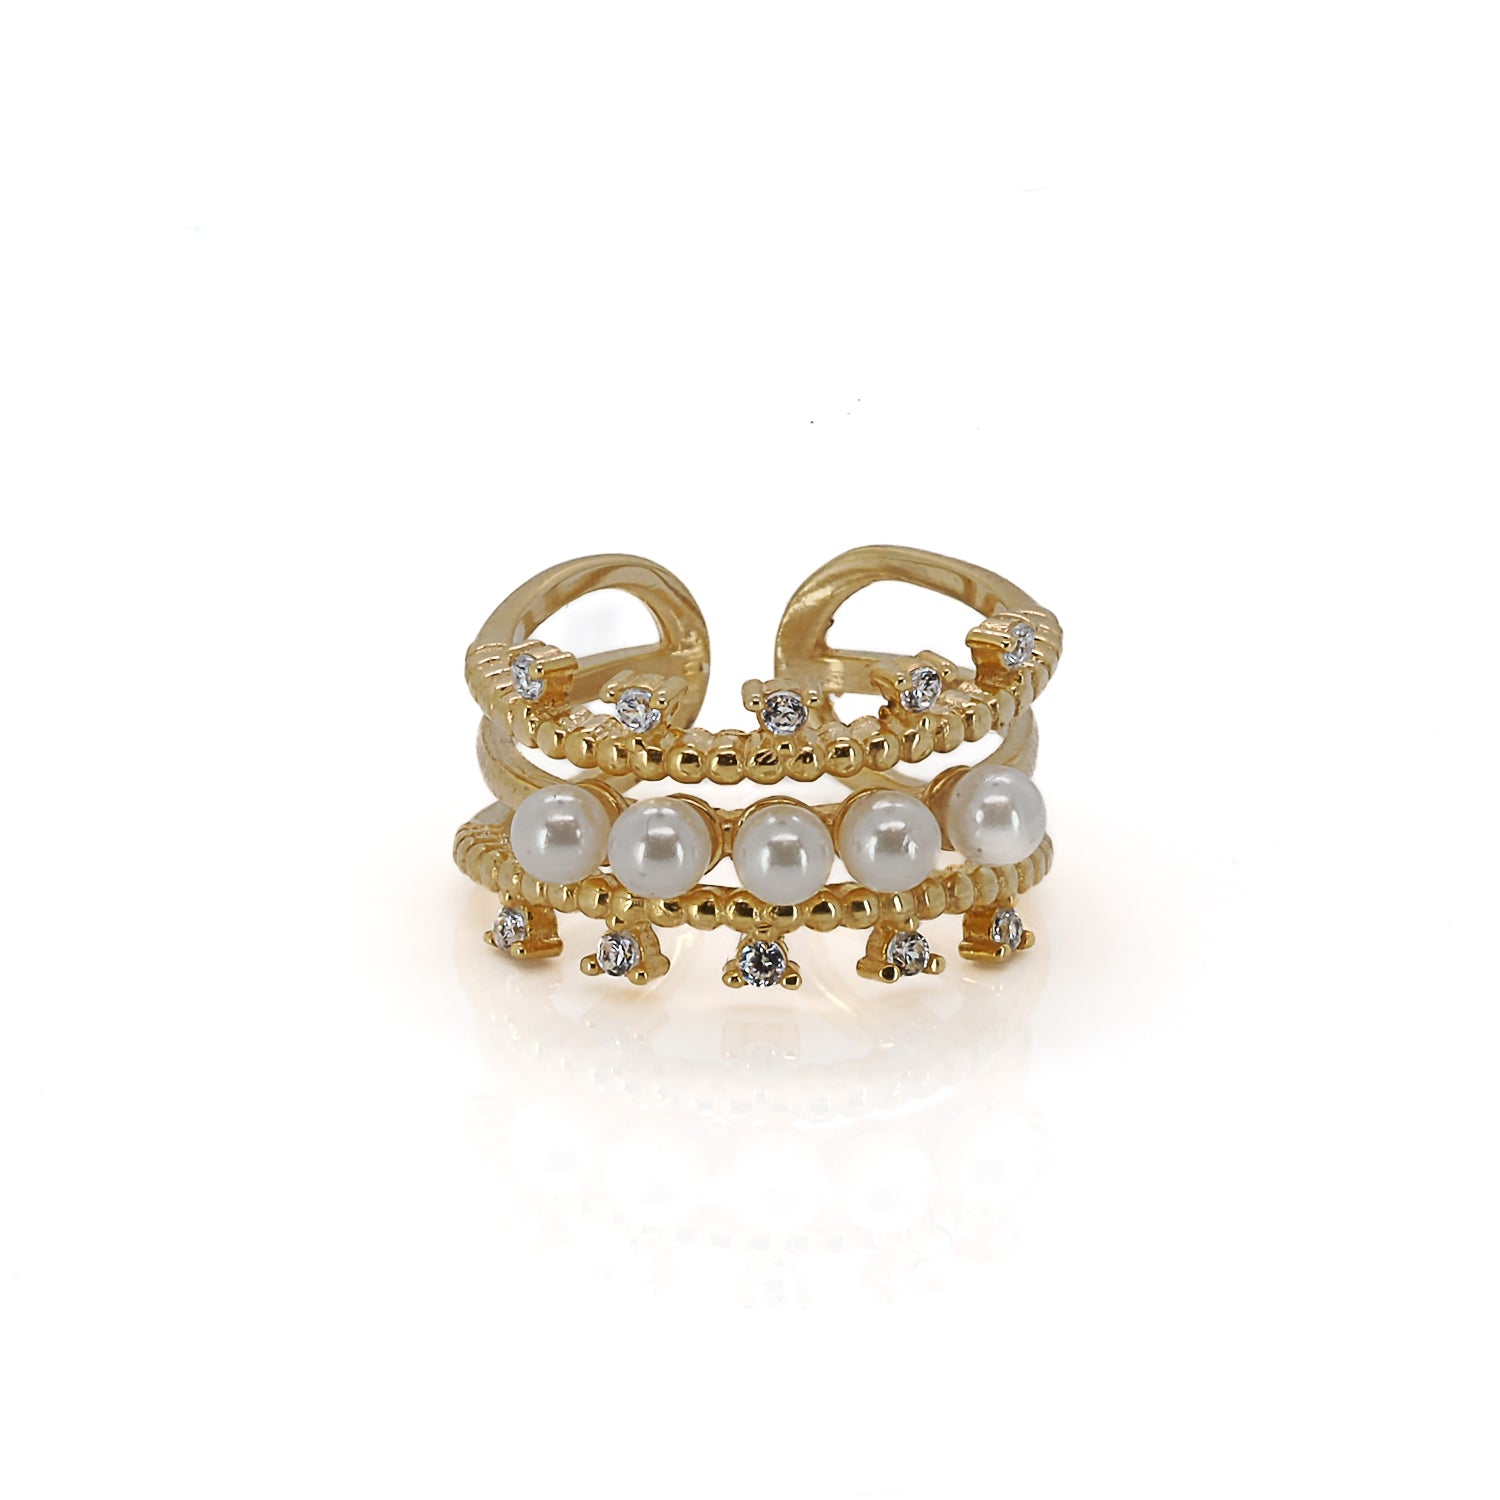 Chic and Elegant Mira Gold Ring - Adorned with Pearls and CZ Diamonds